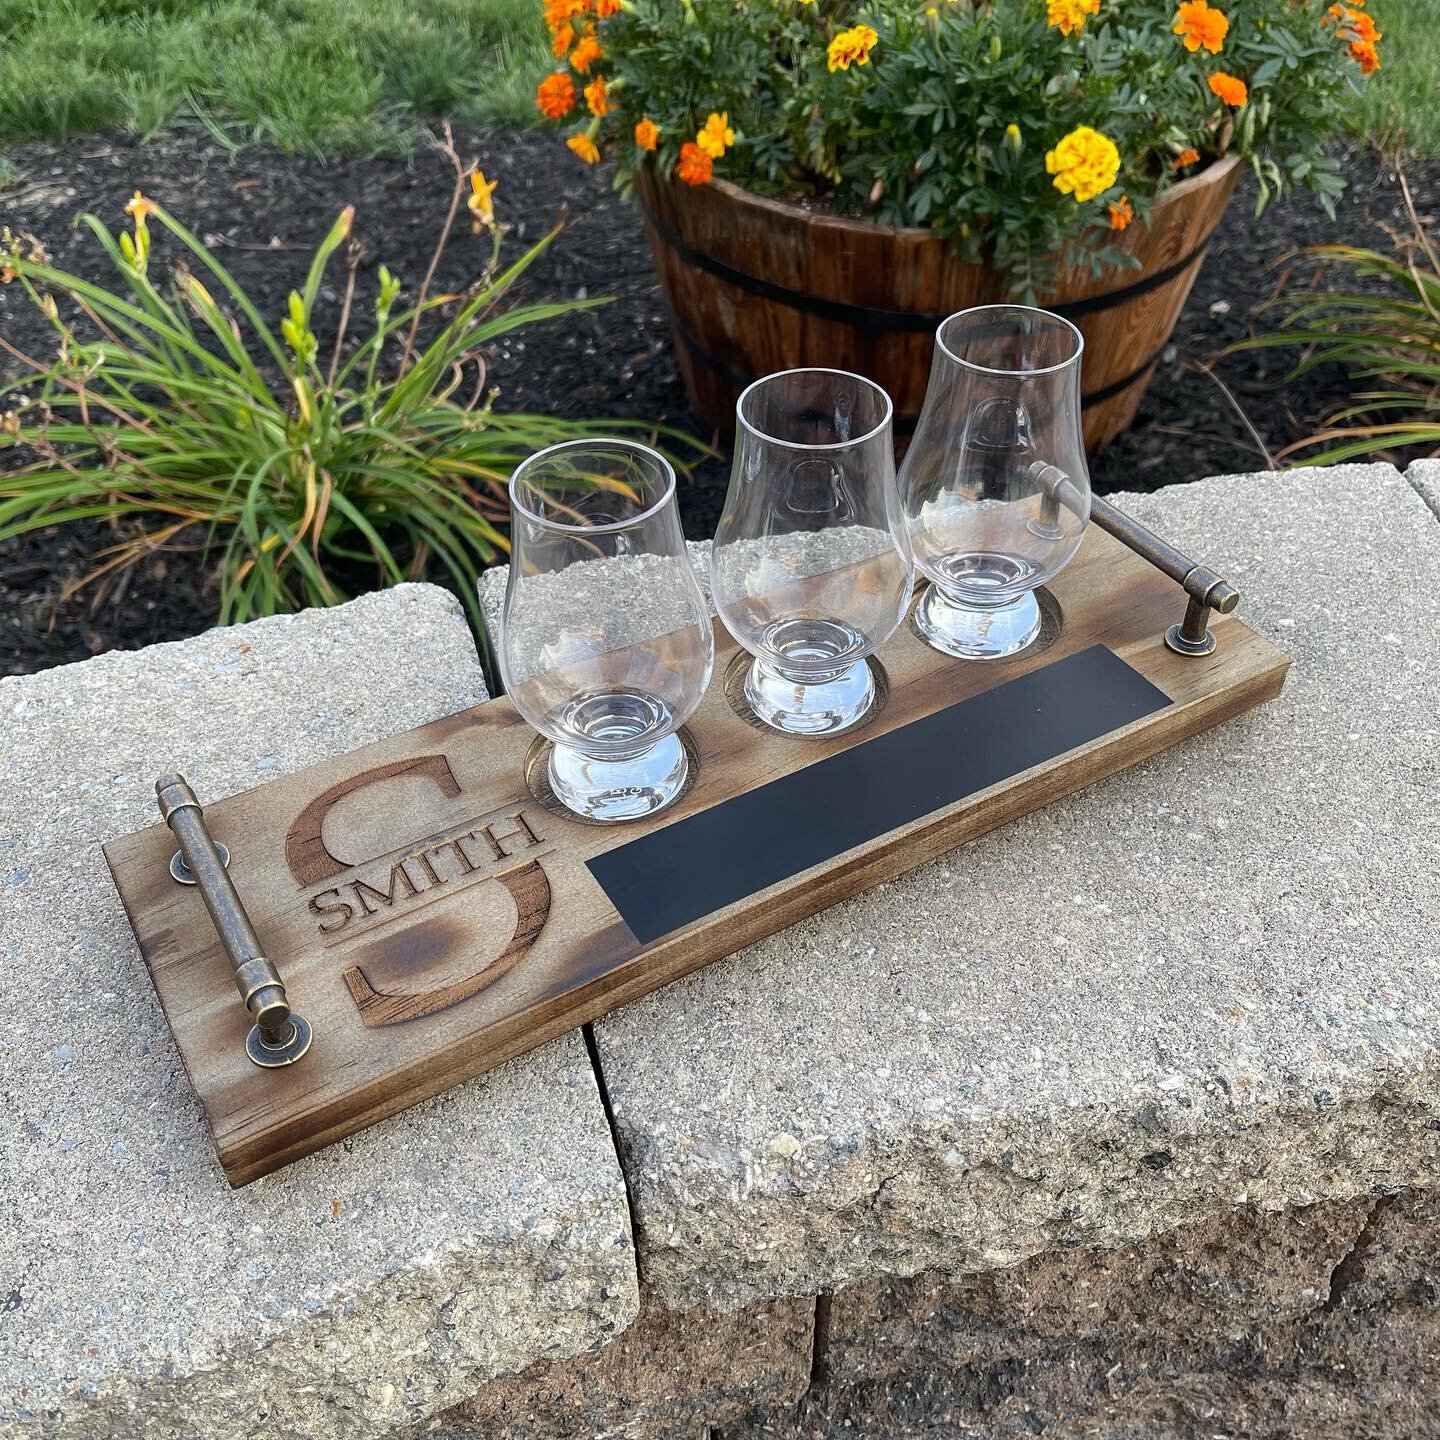 Here&rsquo;s a preview of the new board design available soon!! #woodworking #beerflight #whiskeyflight #whiskey #craftbeer #beer #scotch #scotchflight#whisky #whiskyflight #bourbon